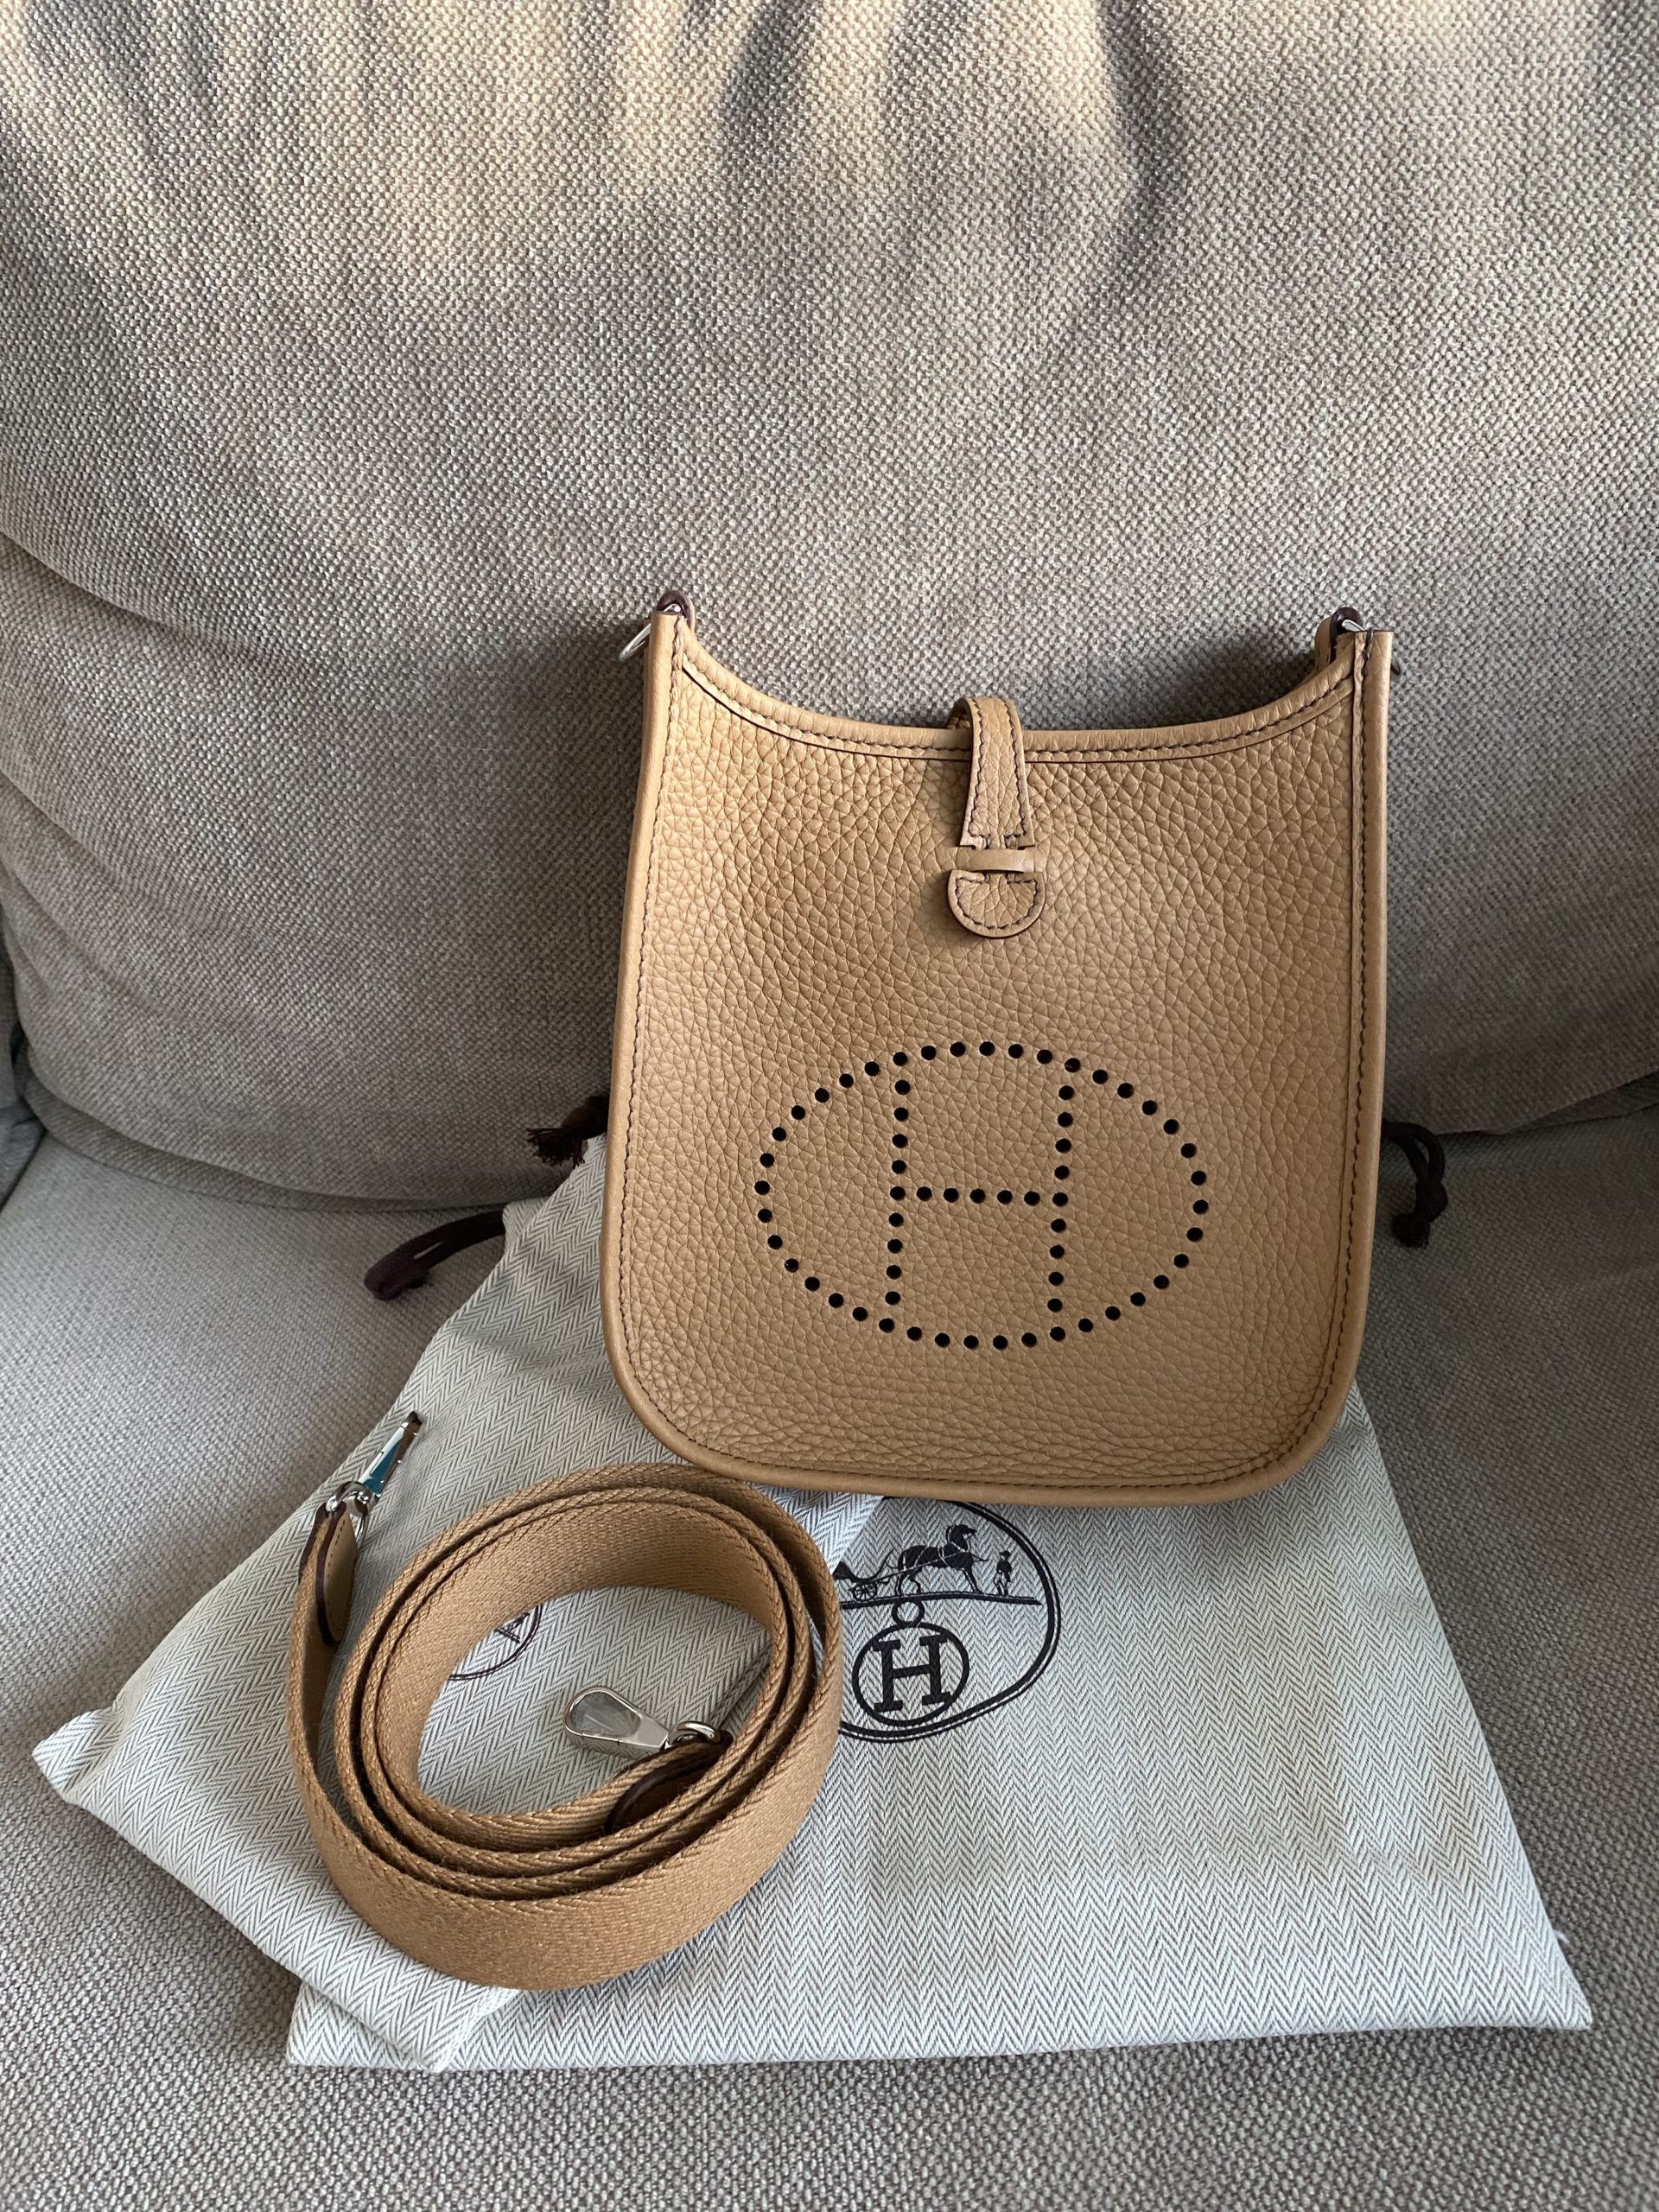 Hermes Evelyne TPM Biscuit/Camel Clemence Phw - The Luxury Flavor